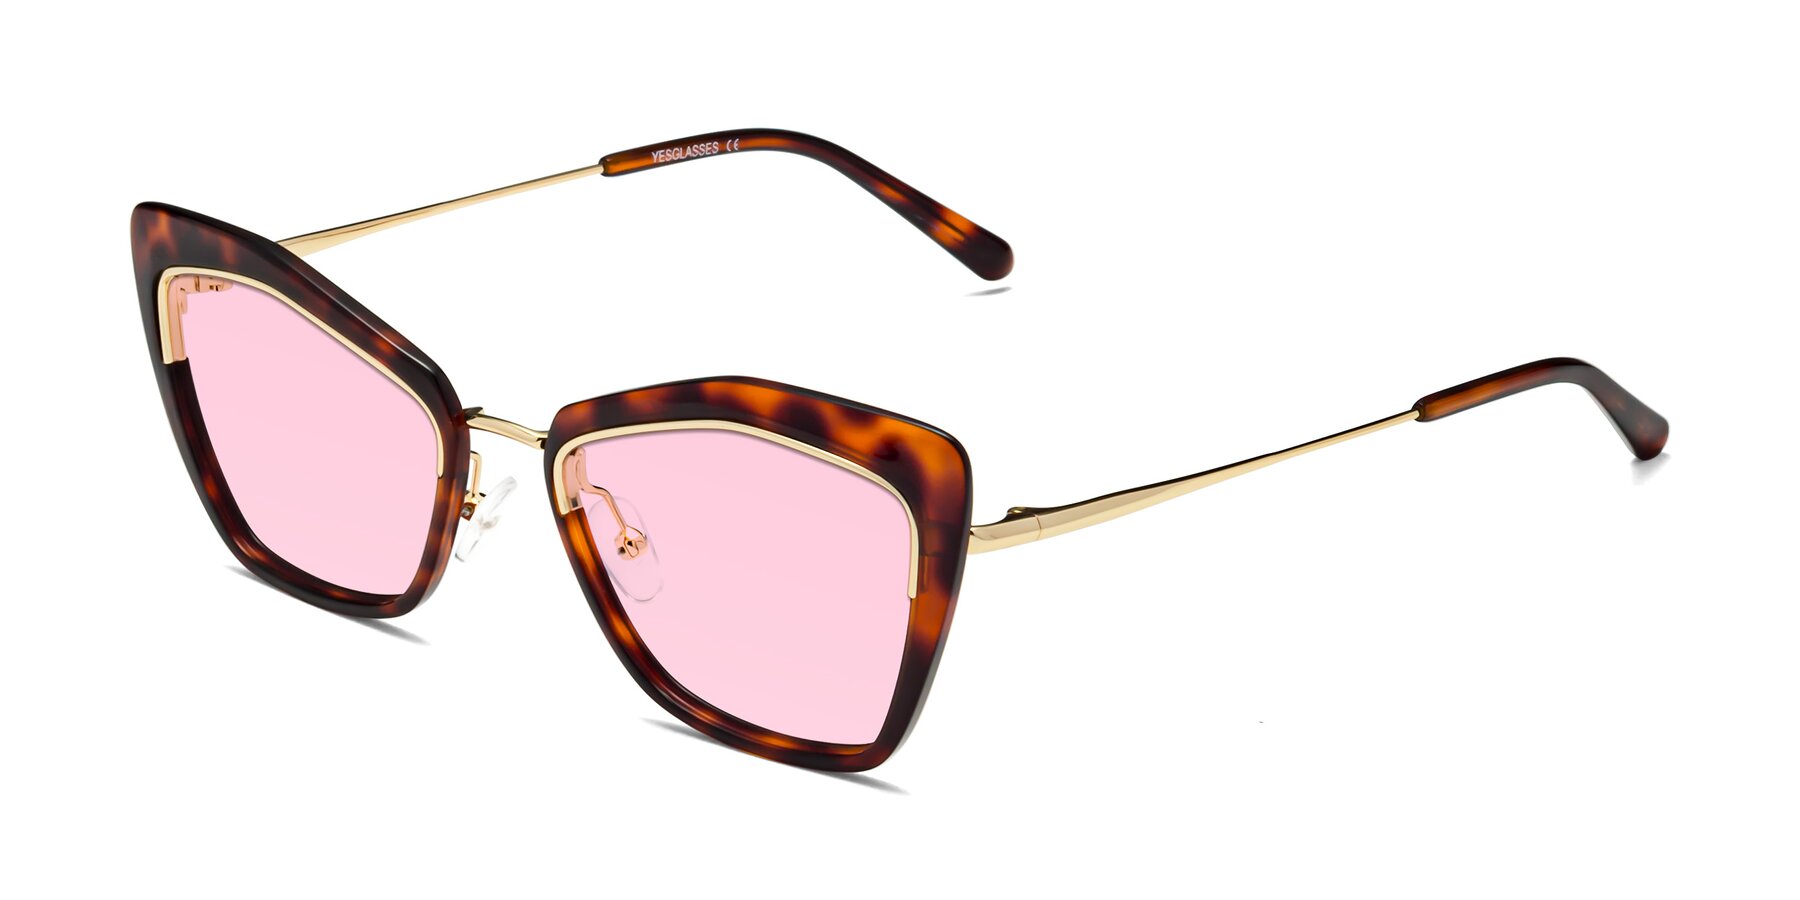 Angle of Lasso in Light Tortoise with Light Pink Tinted Lenses